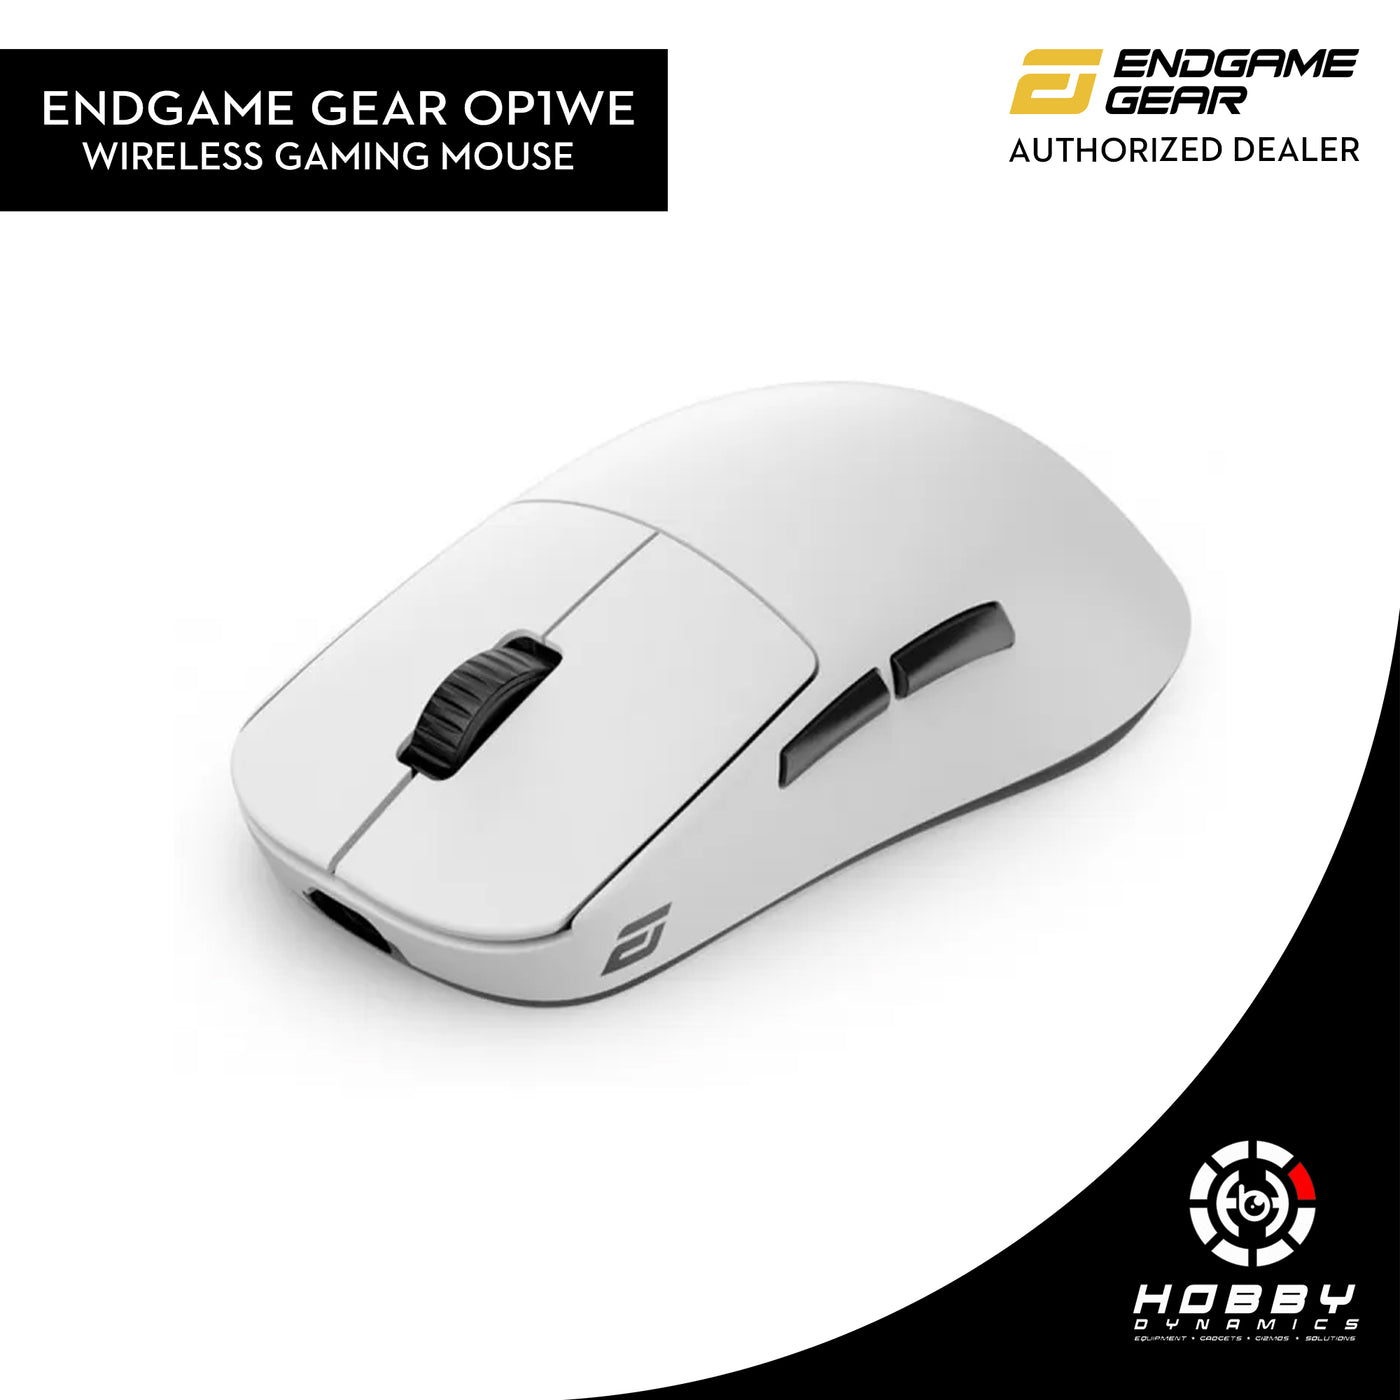 Endgame Gear OP1we Wireless Gaming Mouse